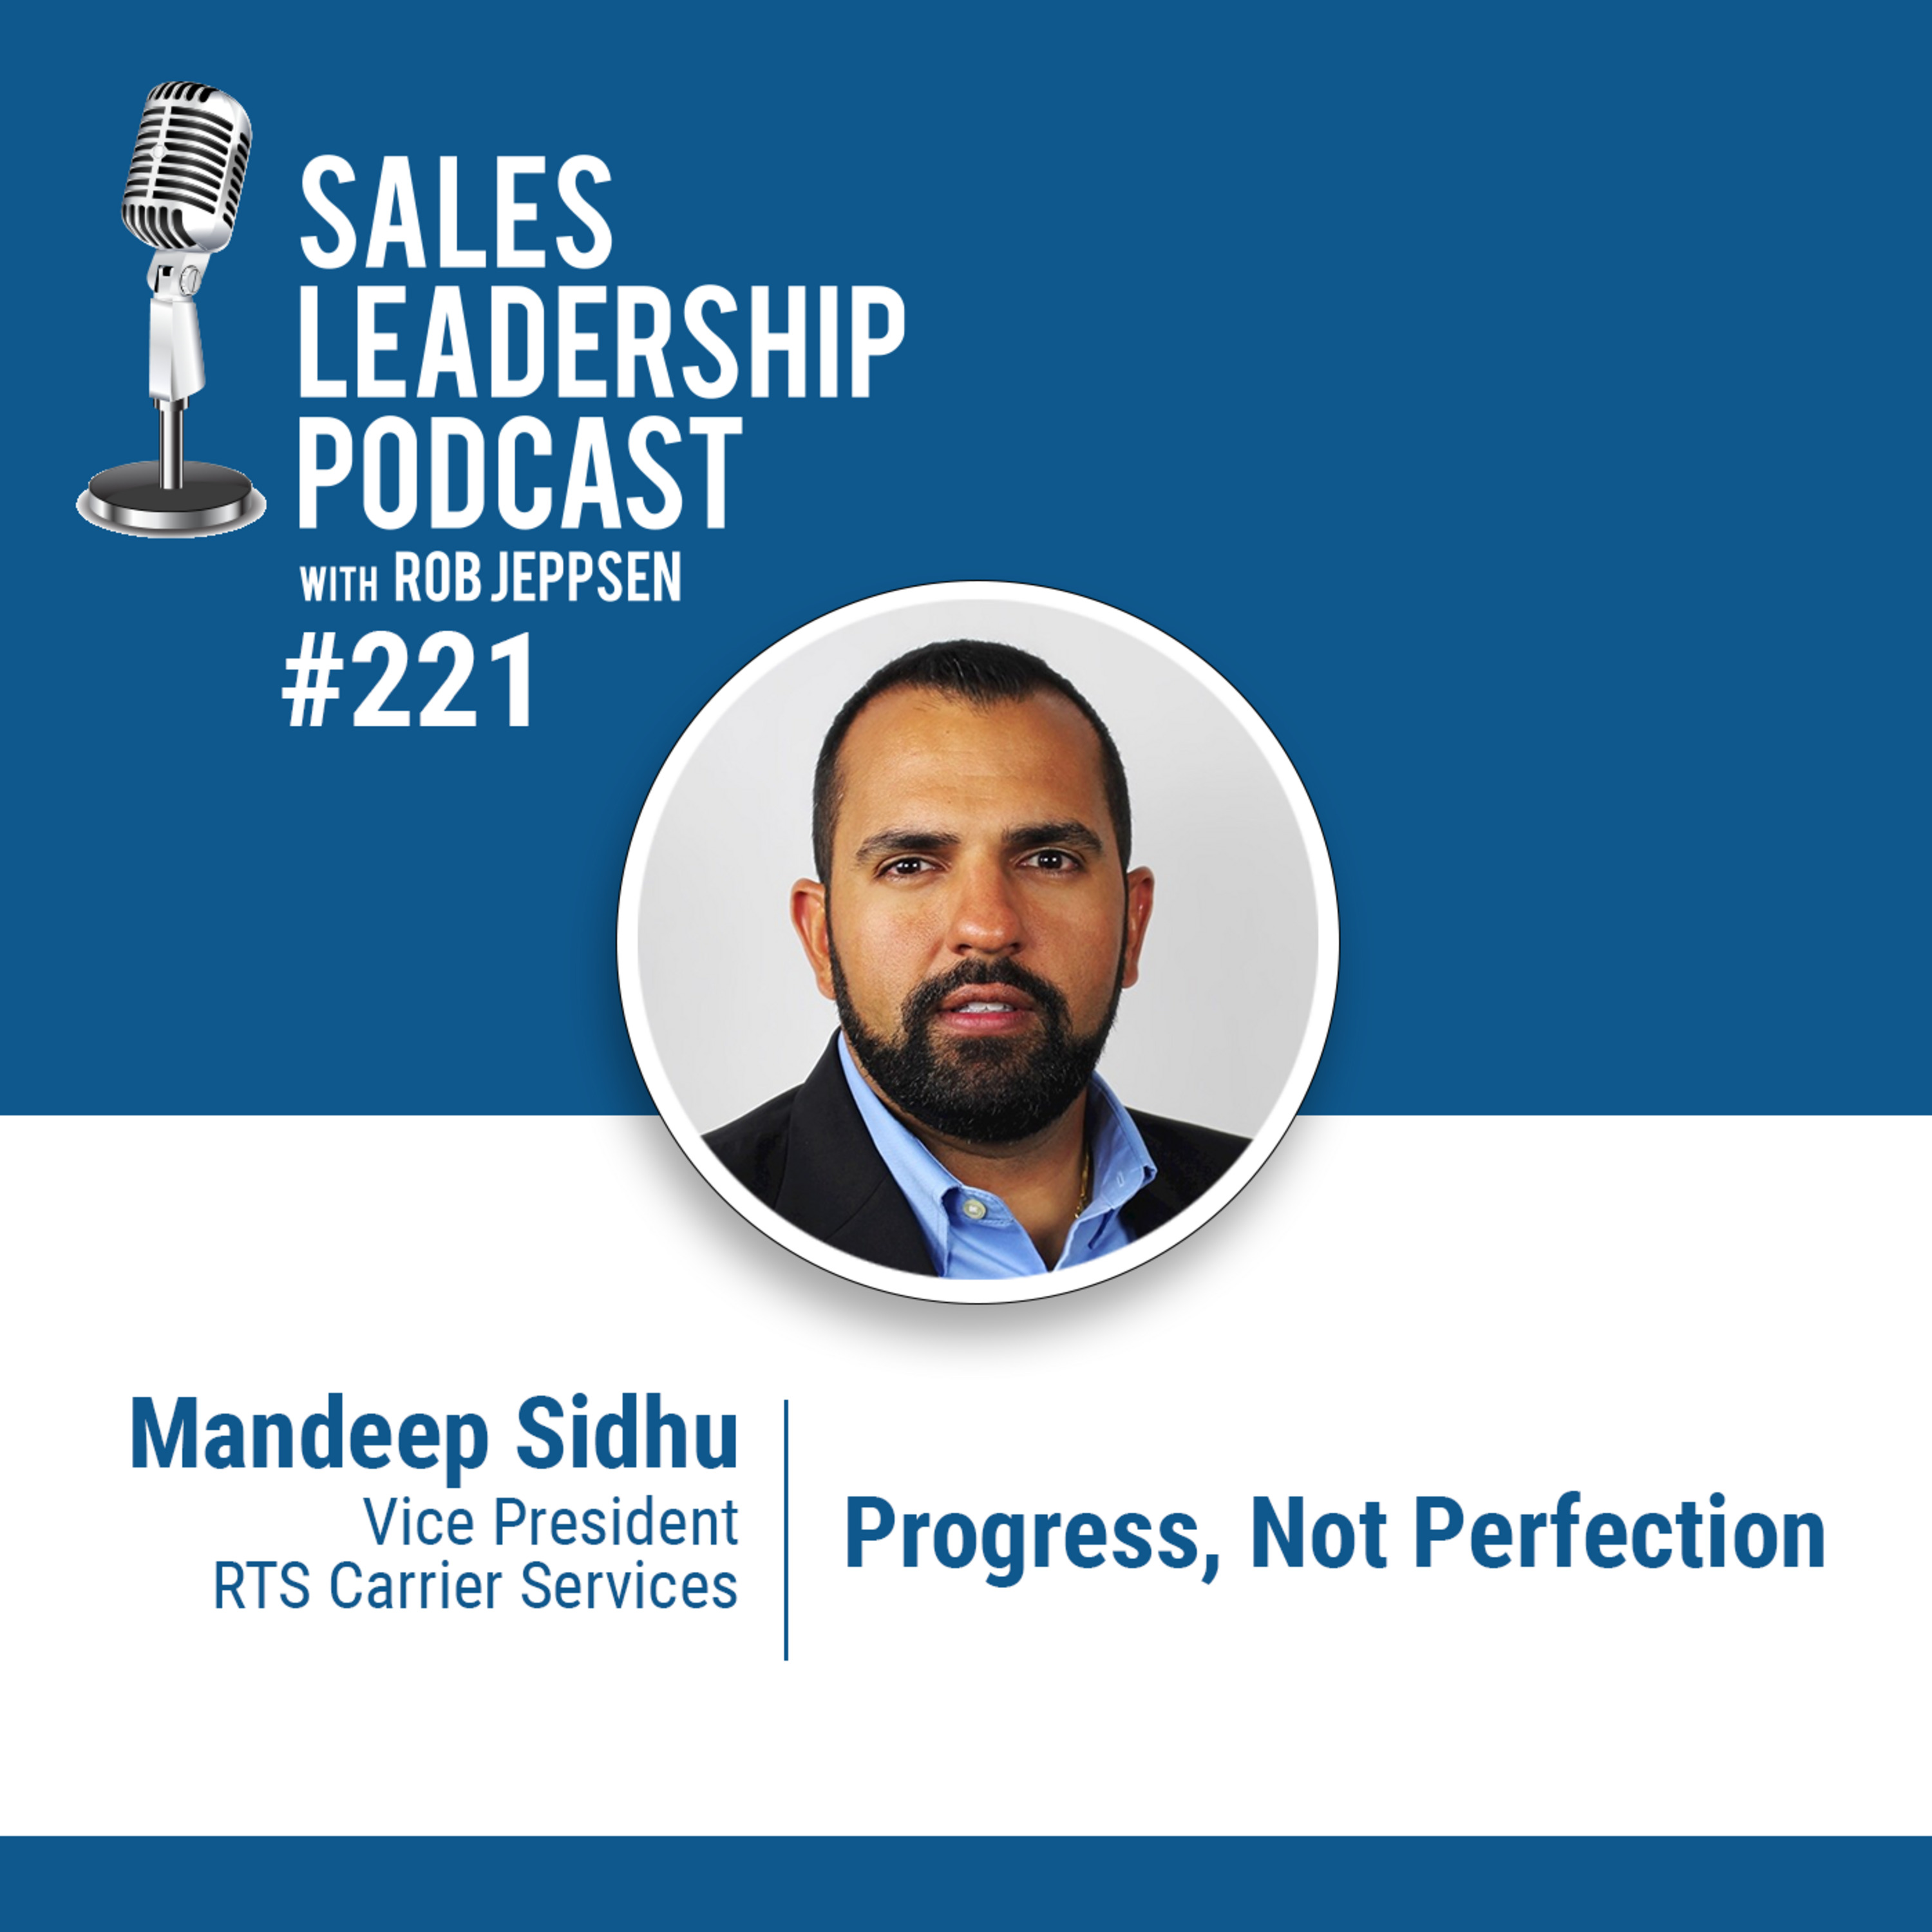 Episode 222: Mandeep Sidhu, VP at RTS Carrier Services — Progress, Not Perfection